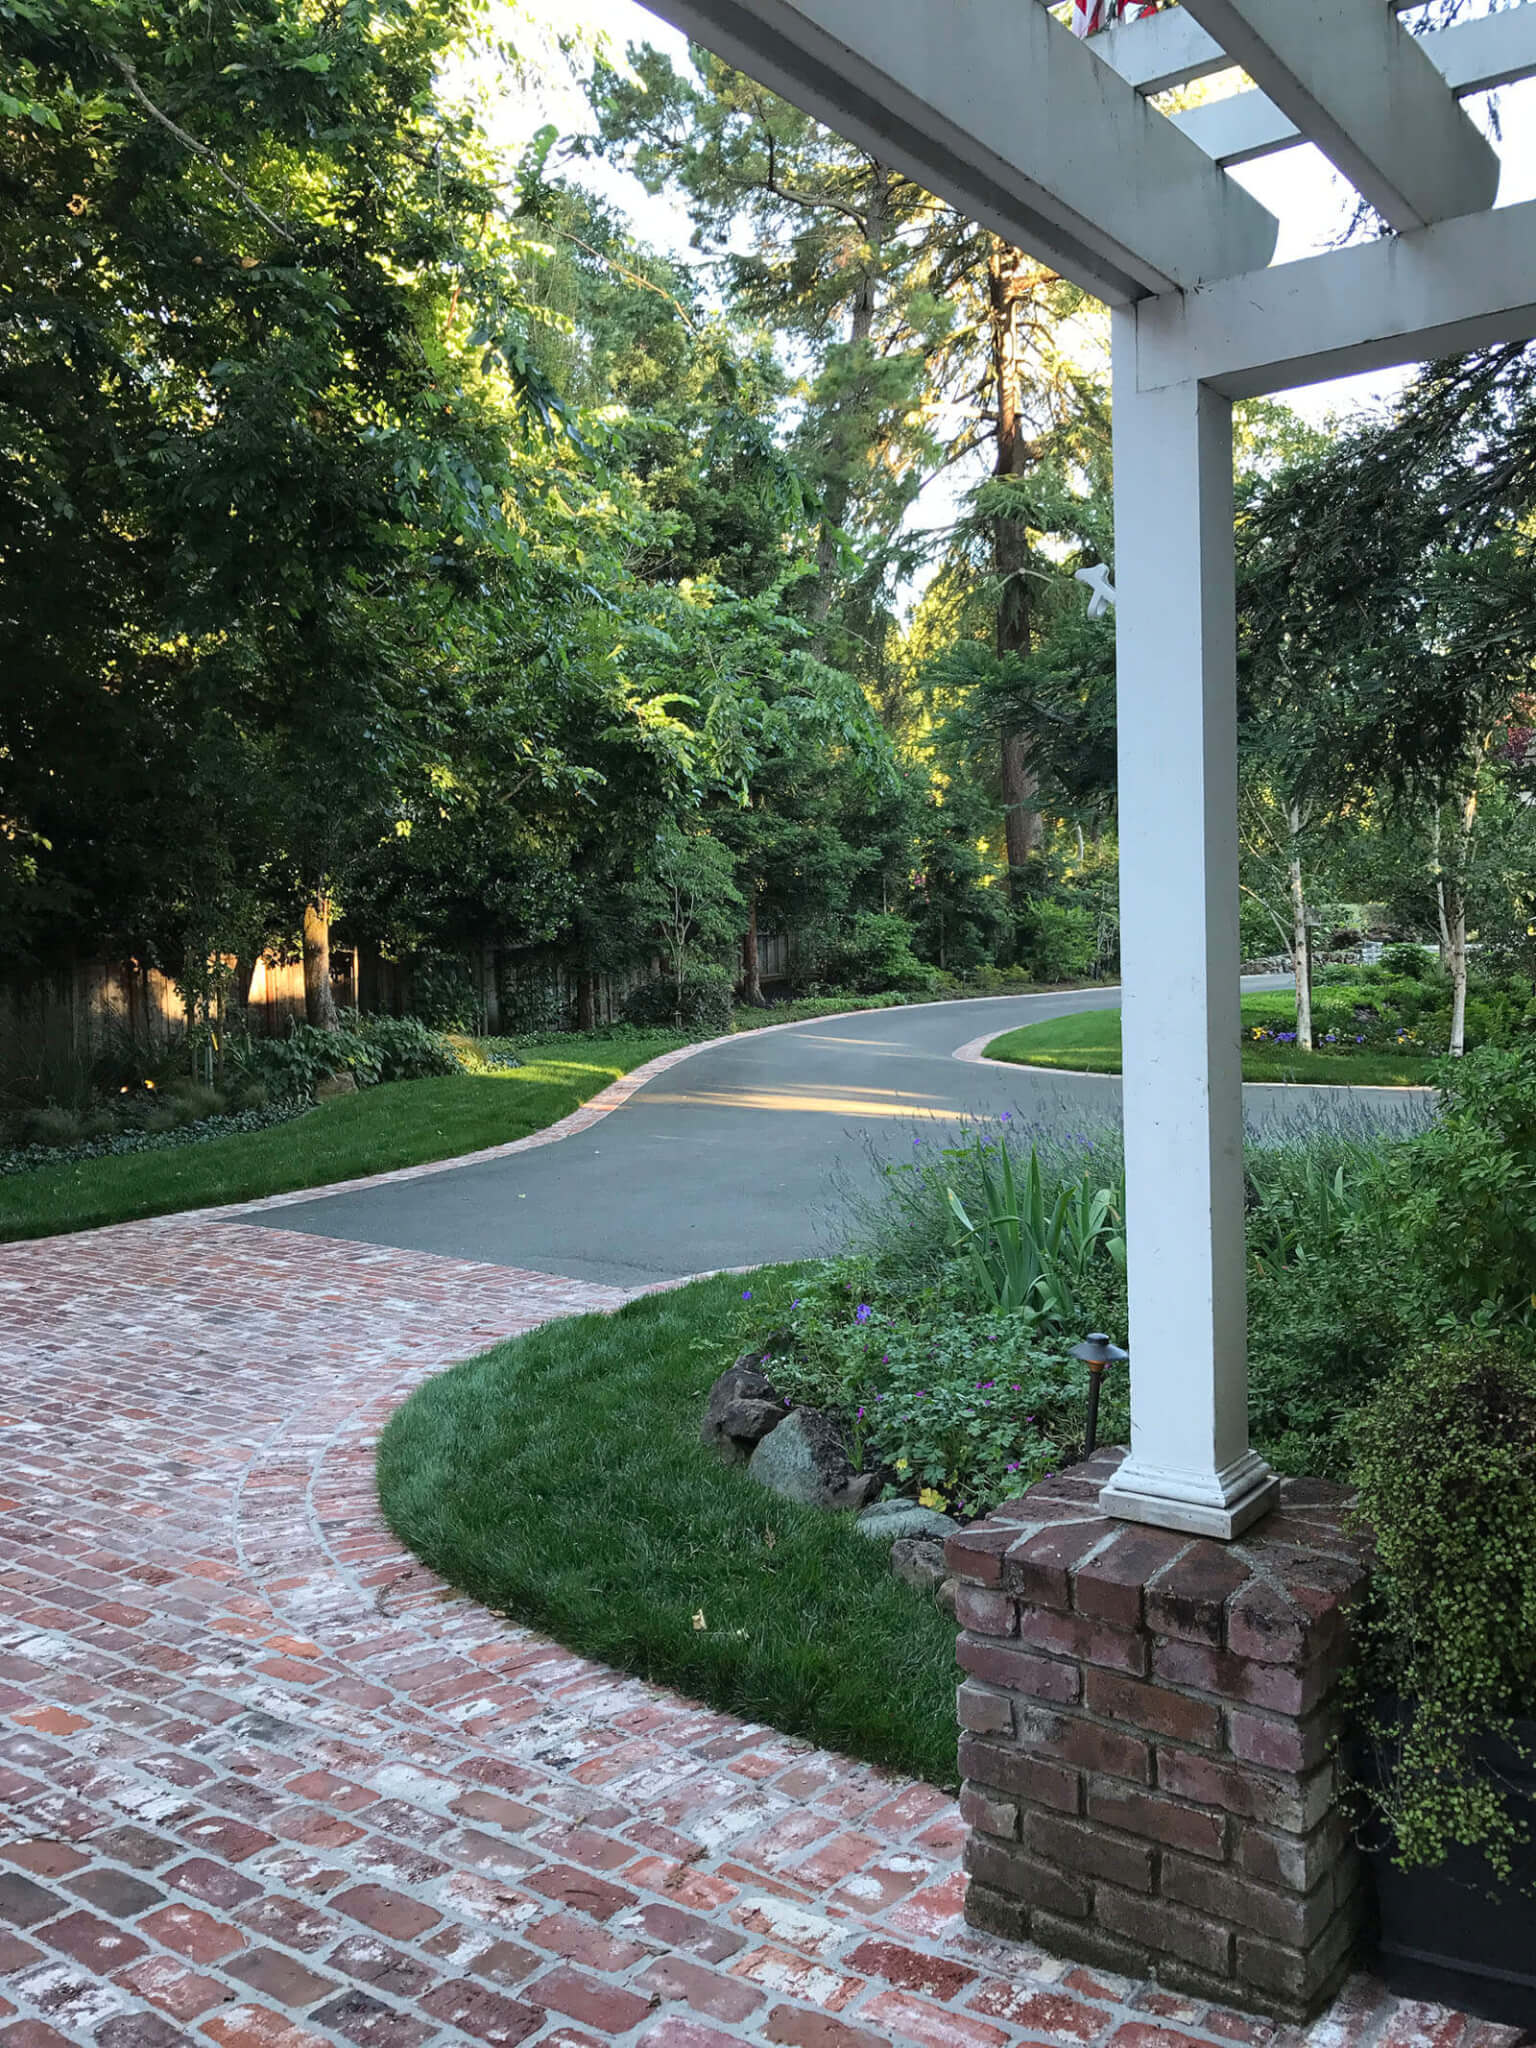 brick-lined driveway leading to brick section under pergola